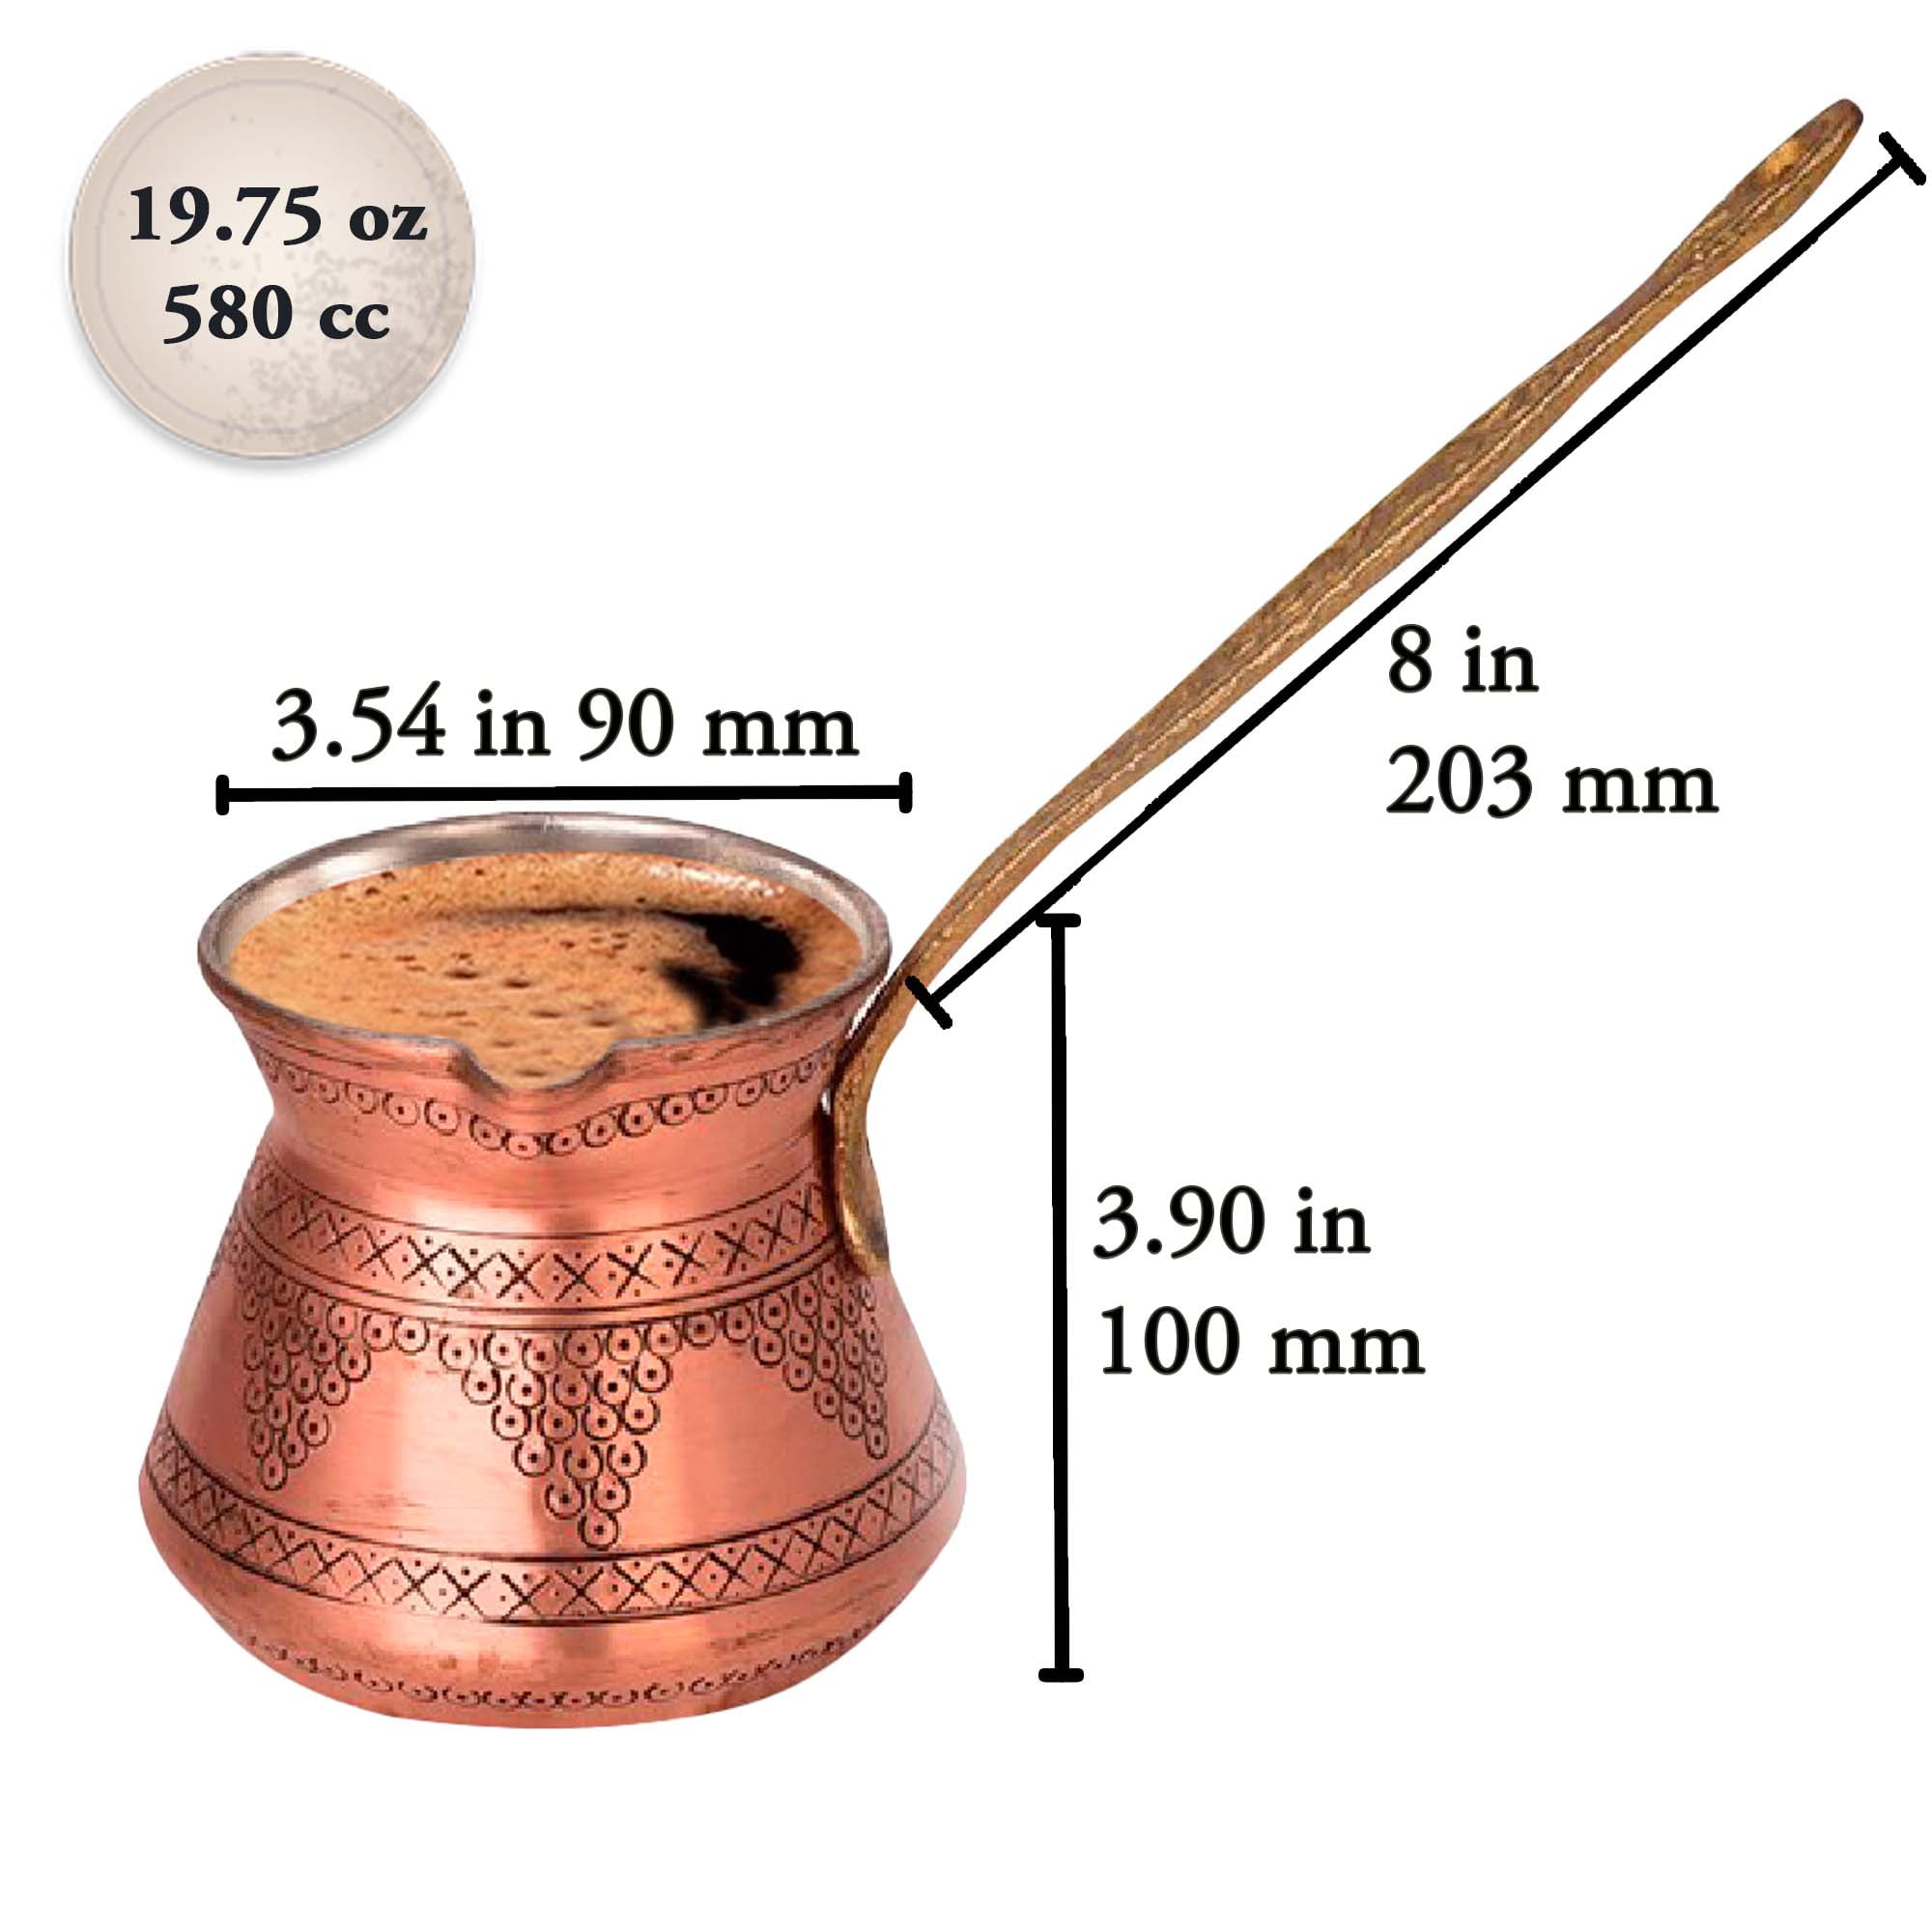 Scash THICKEST Solid Hammered Copper Turkish Greek Arabic Coffee Pot Stovetop Coffee Maker Cezve Ibrik Briki with Wooden Handle, Large - 15 Oz ENGRAVED 